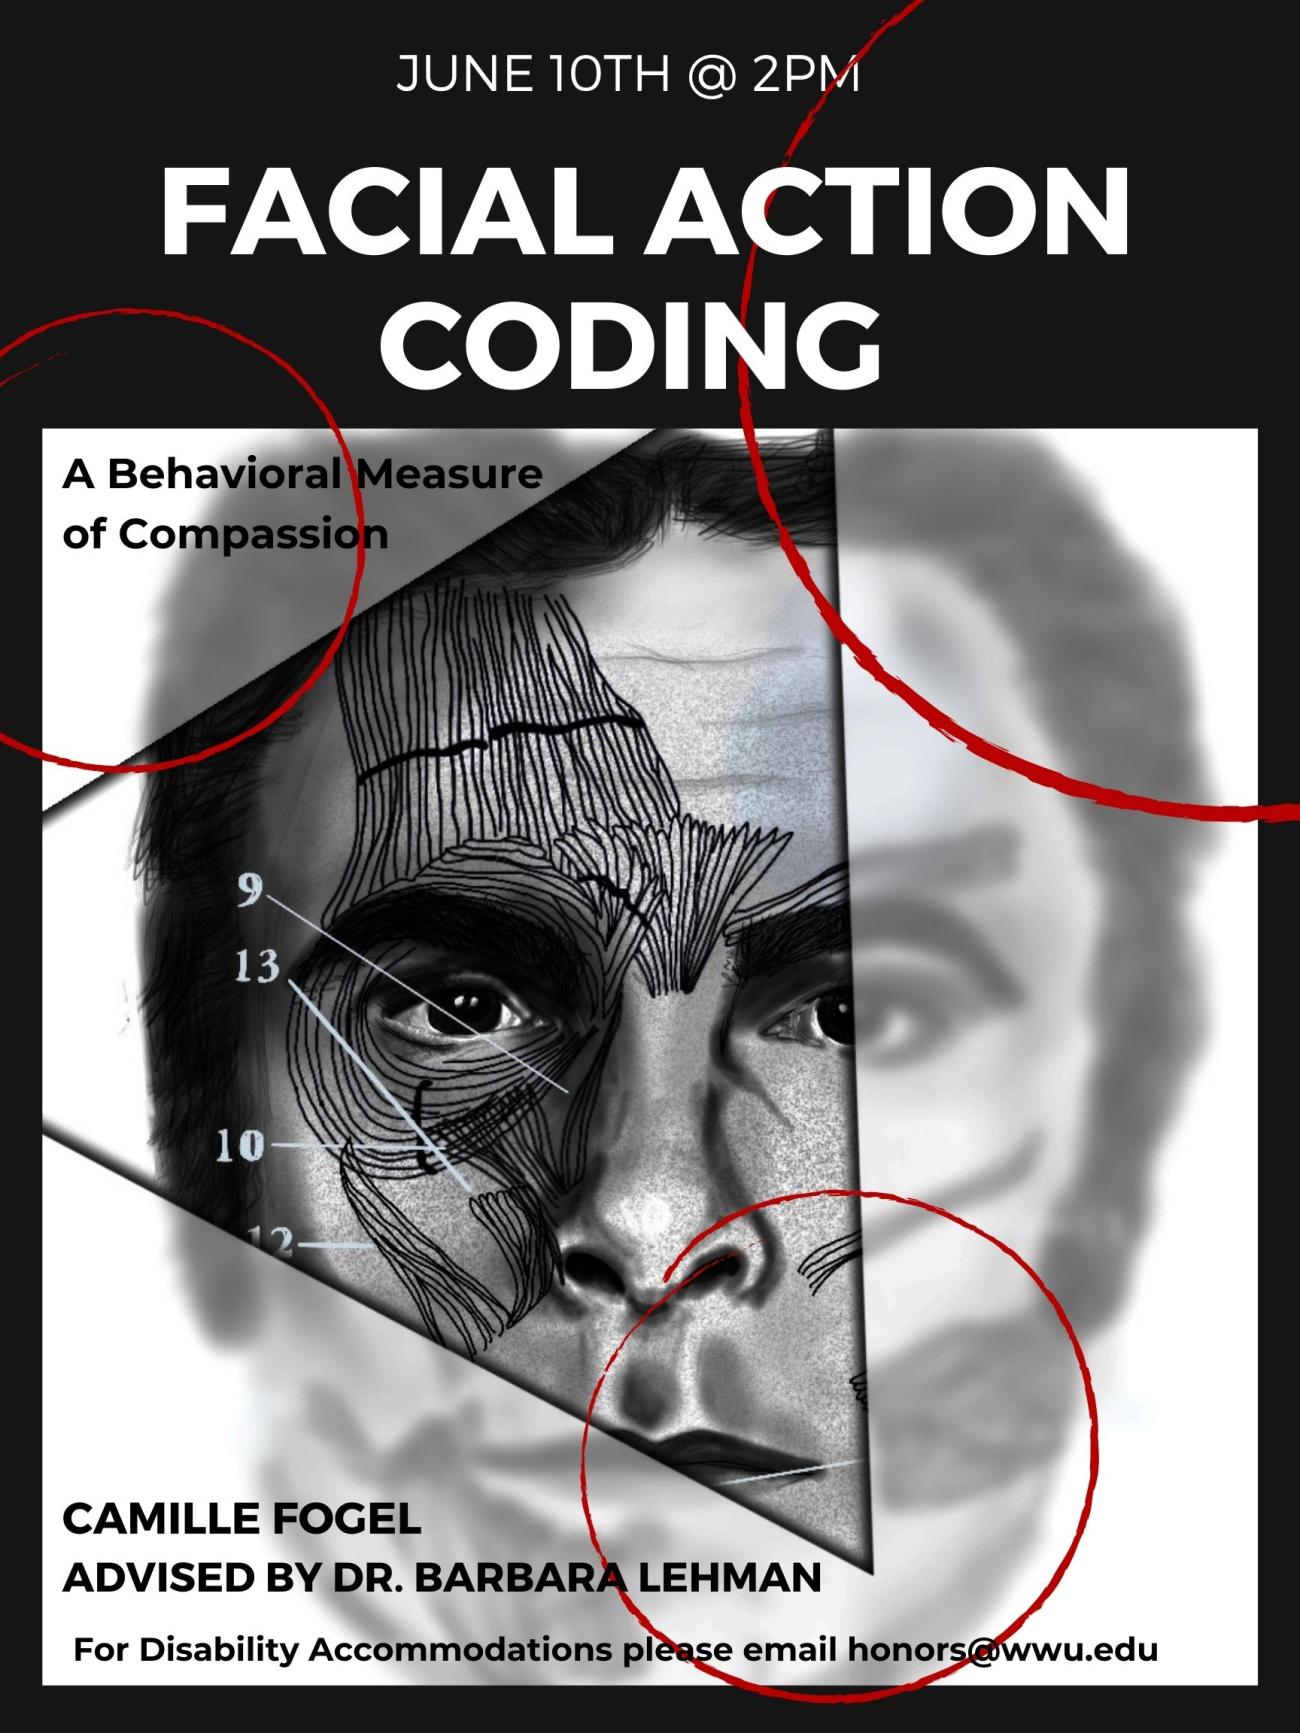 A diagram of musculature overlaying a black and white sketch of a man's face. Muscles are labeled with numbers. Around the image, text reads, "Facial Action Coding: A Behavioral Measure of Compassion. Camille Fogel, advised by Dr. Barbara Lehman. June 10th @ 2 PM. For disability accommodations please email honors@wwu.edu". 